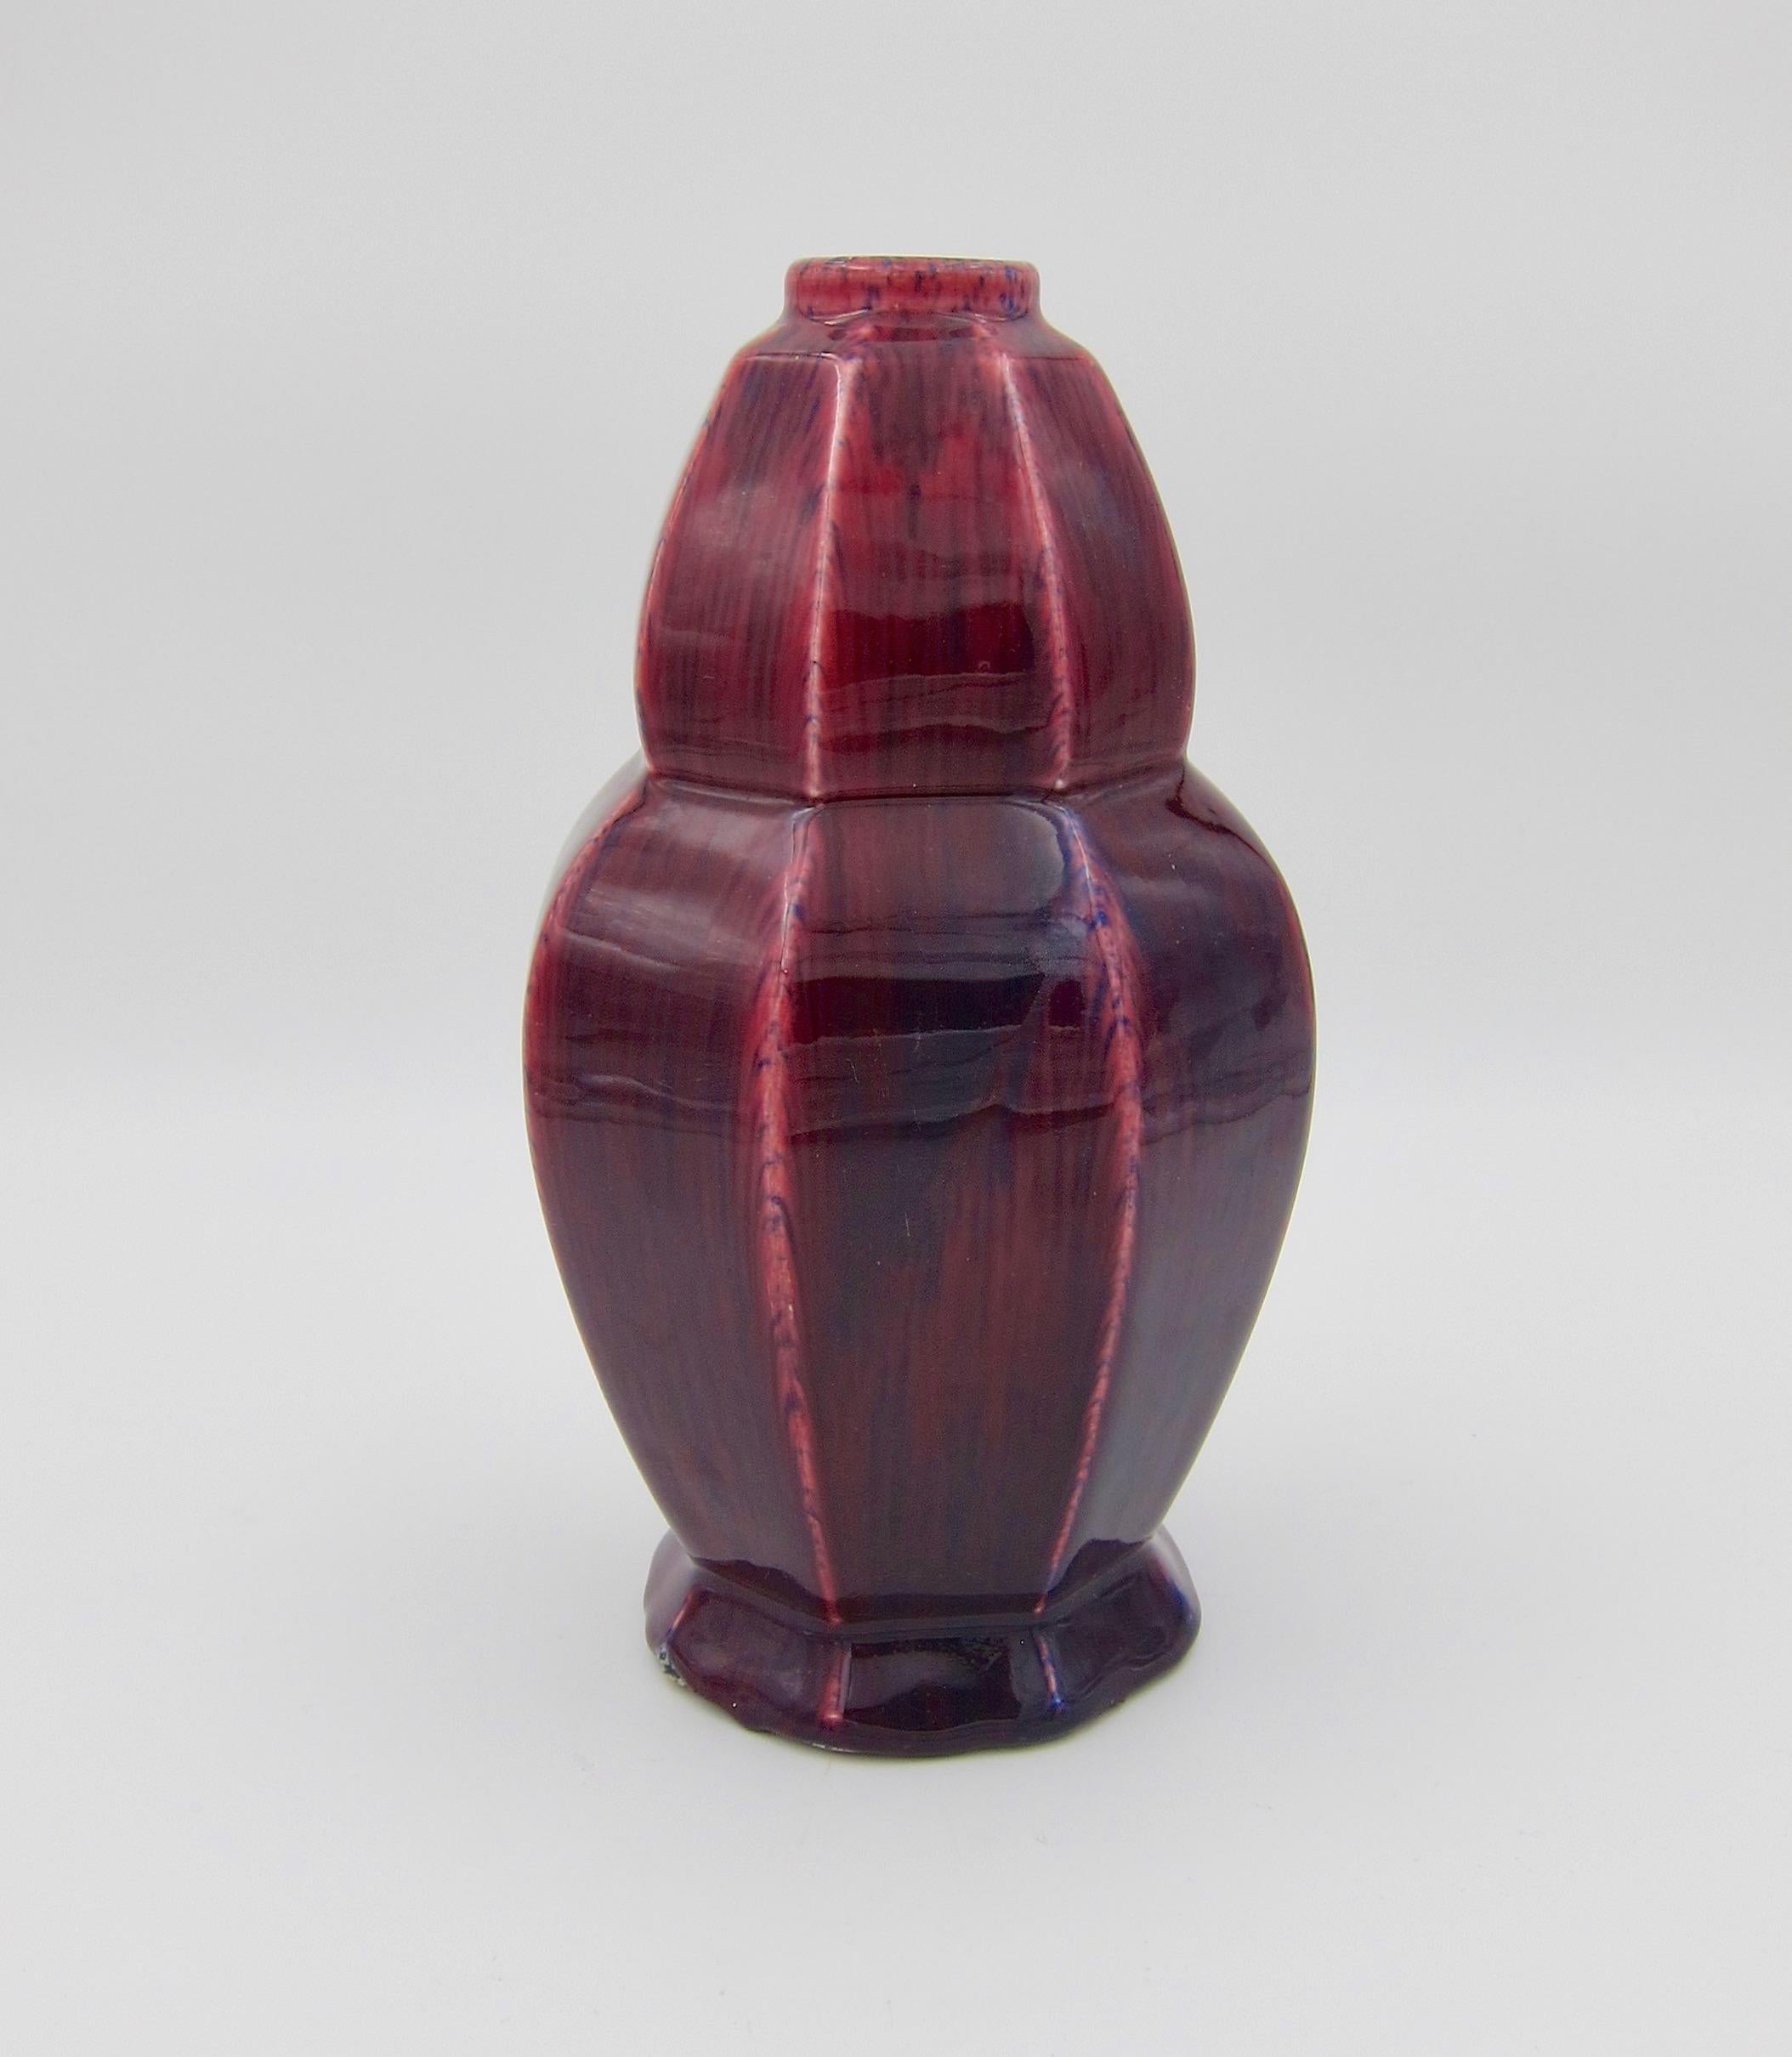 A vintage European art pottery vase in an octagonal Art Deco shape enveloped in a deep pink/red glaze with dark blue hand painted accents. At a distance, the colors combine to create the appearance of a glossy oxblood-colored glaze. The earthenware